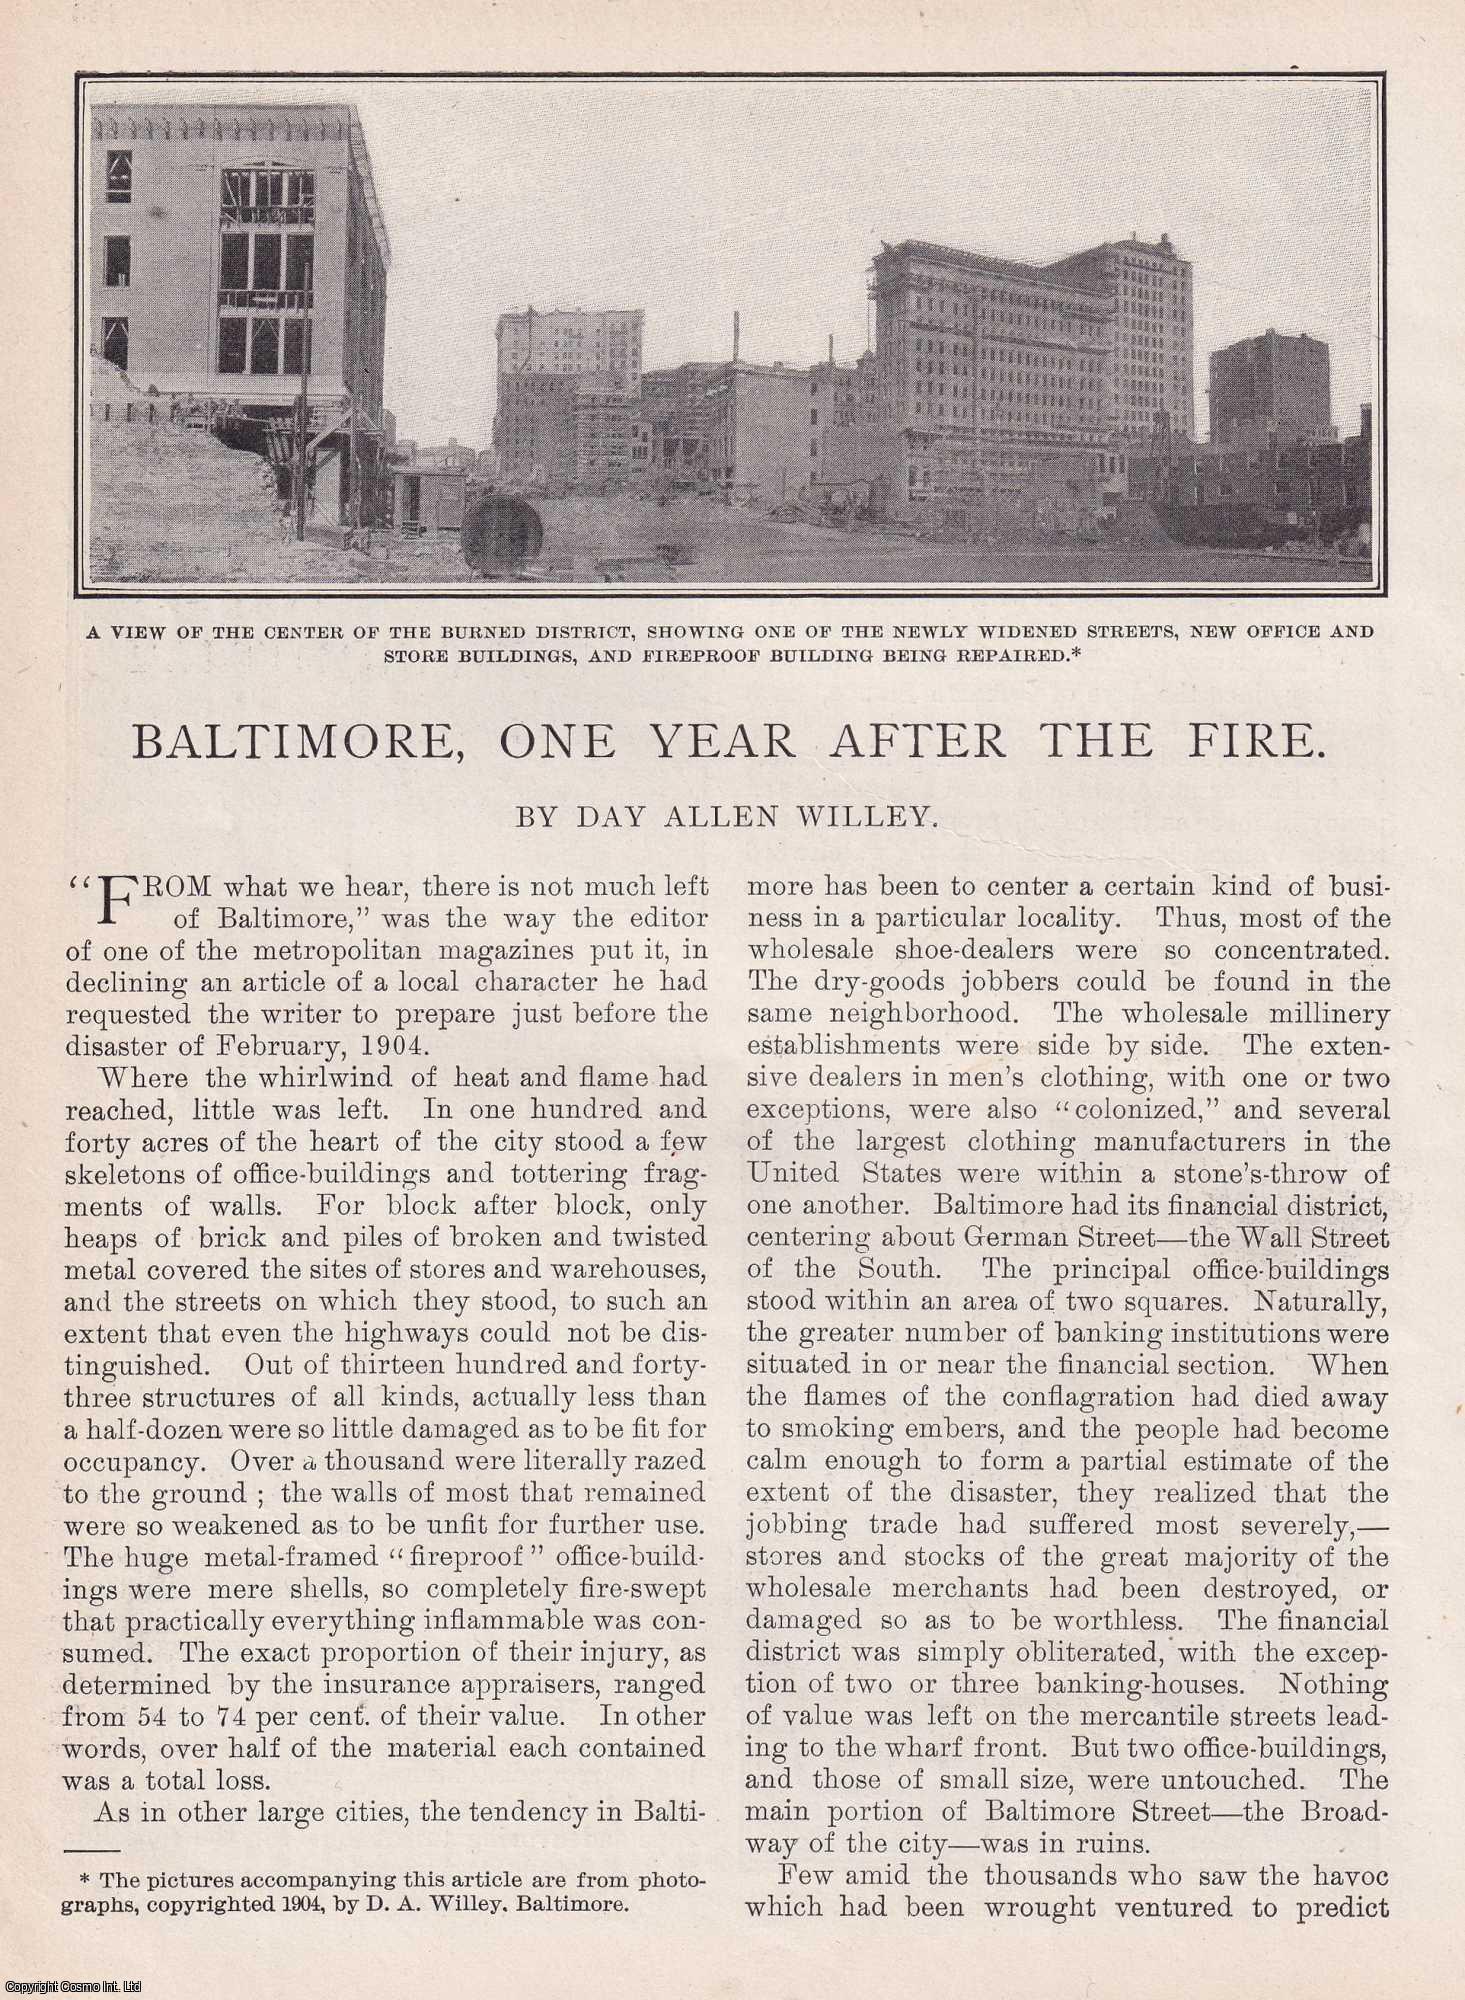 Day Allen Willey - Baltimore, One Year After the Fire of February 1904. An original article from the American Review of Reviews, 1905.